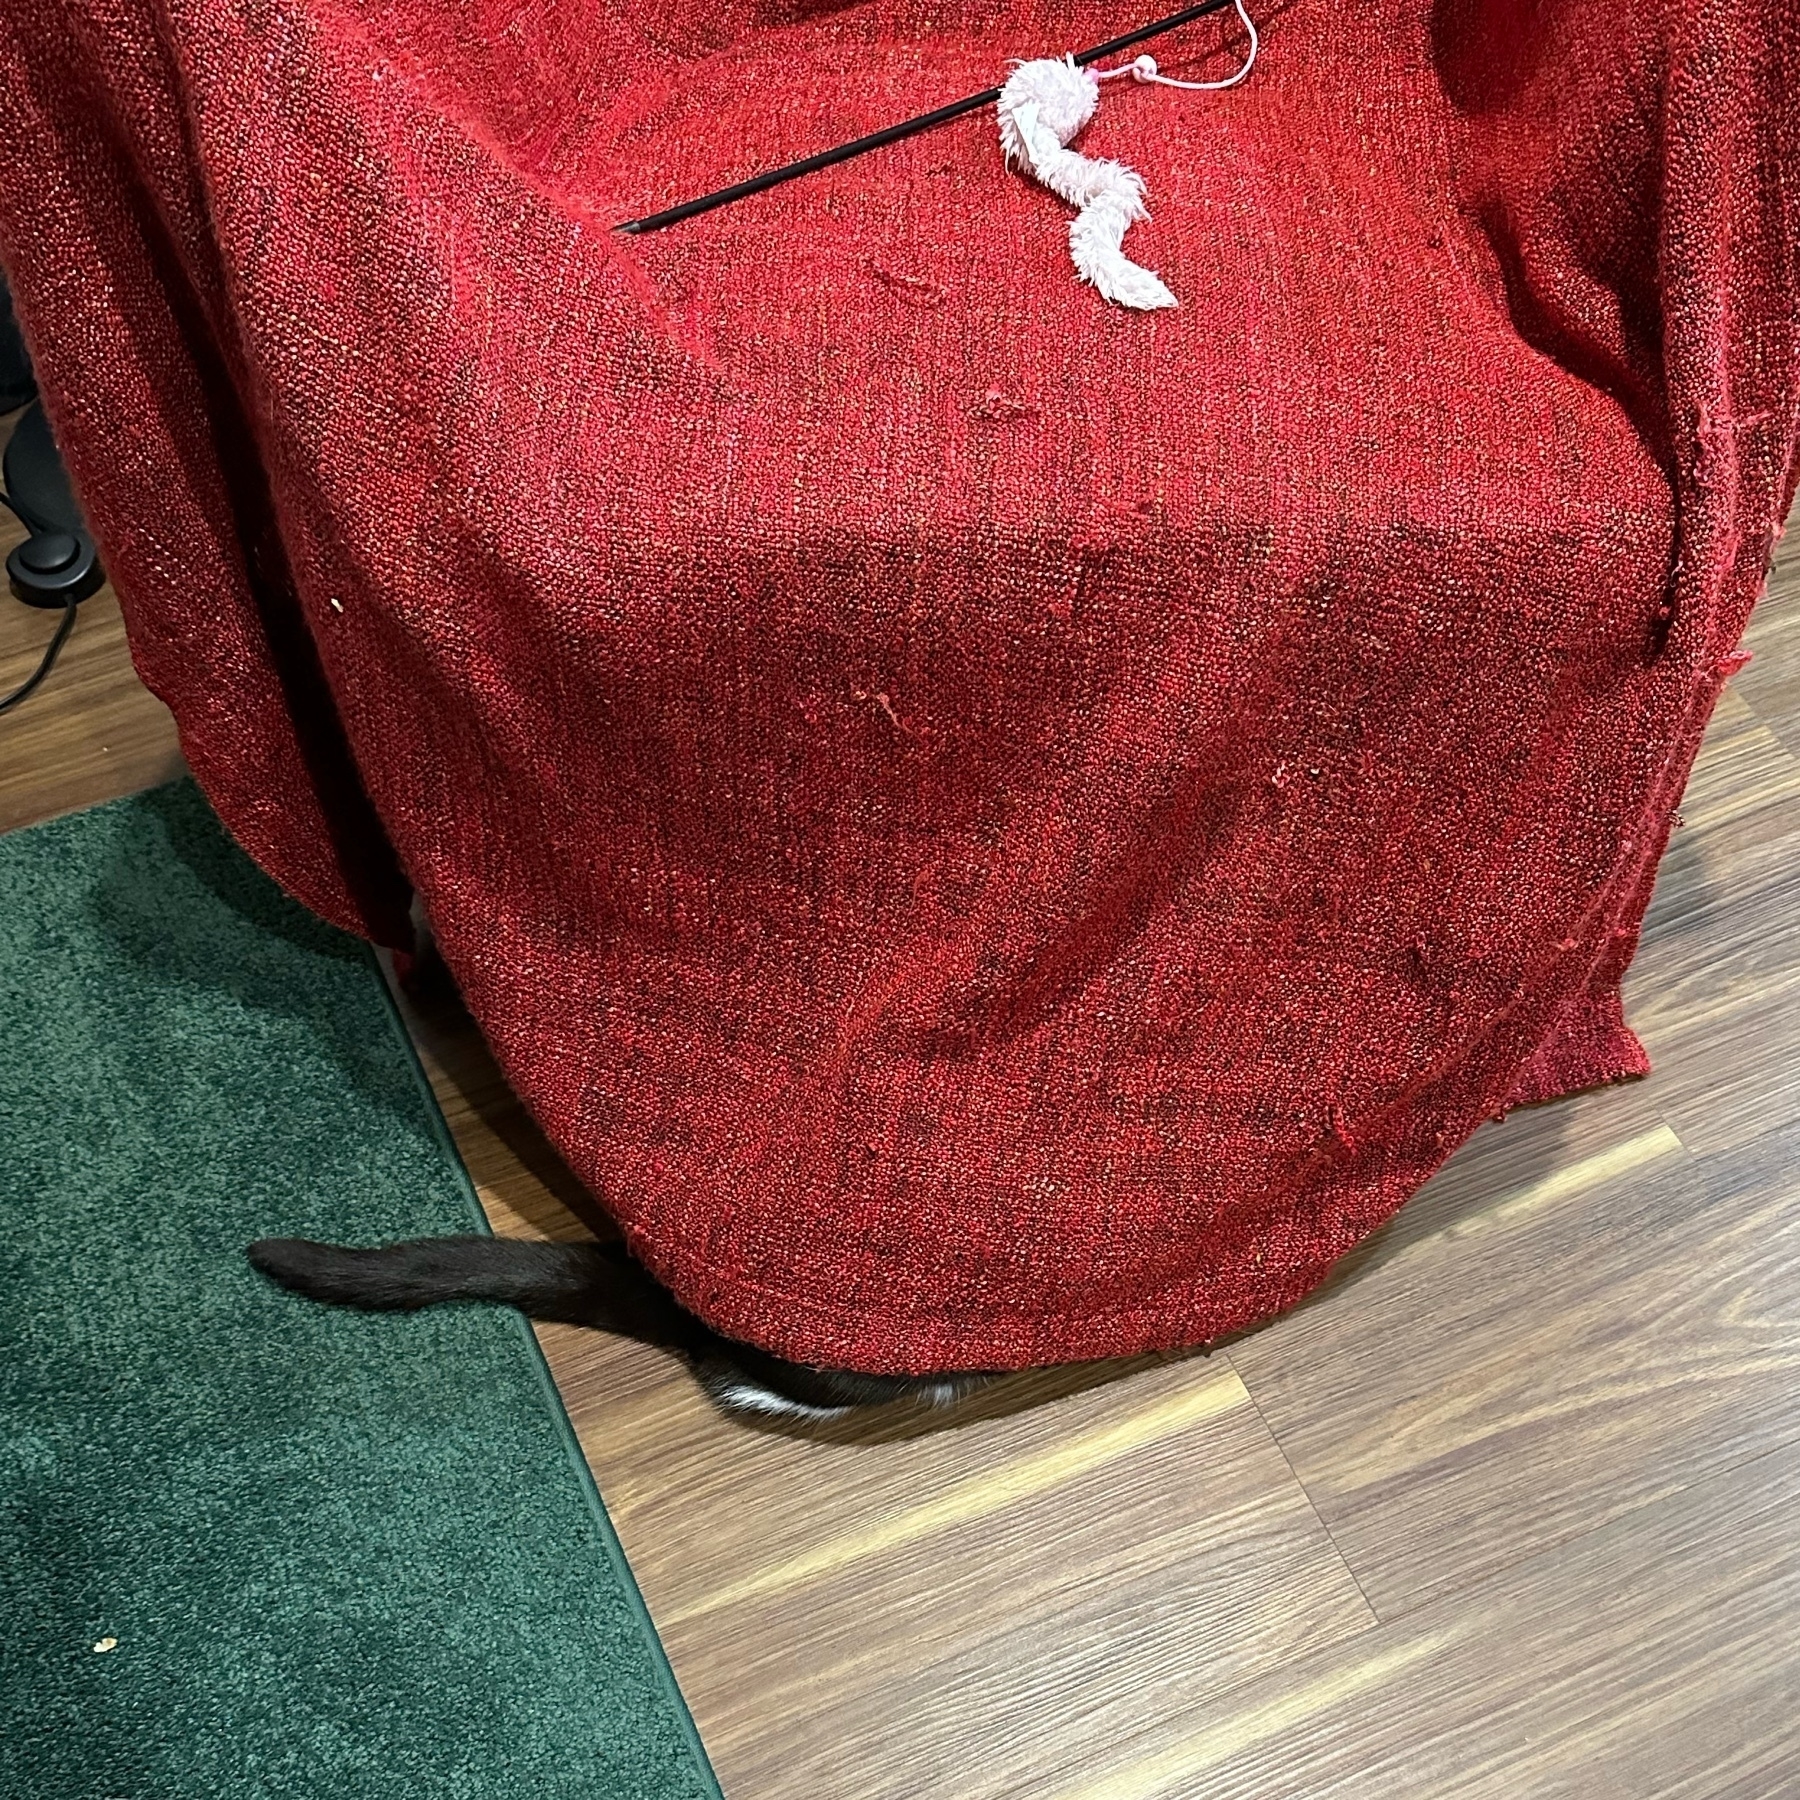 A red throw rug is over a large armchair. A black cat tail and part of a paw are visible poking out from under the throw.